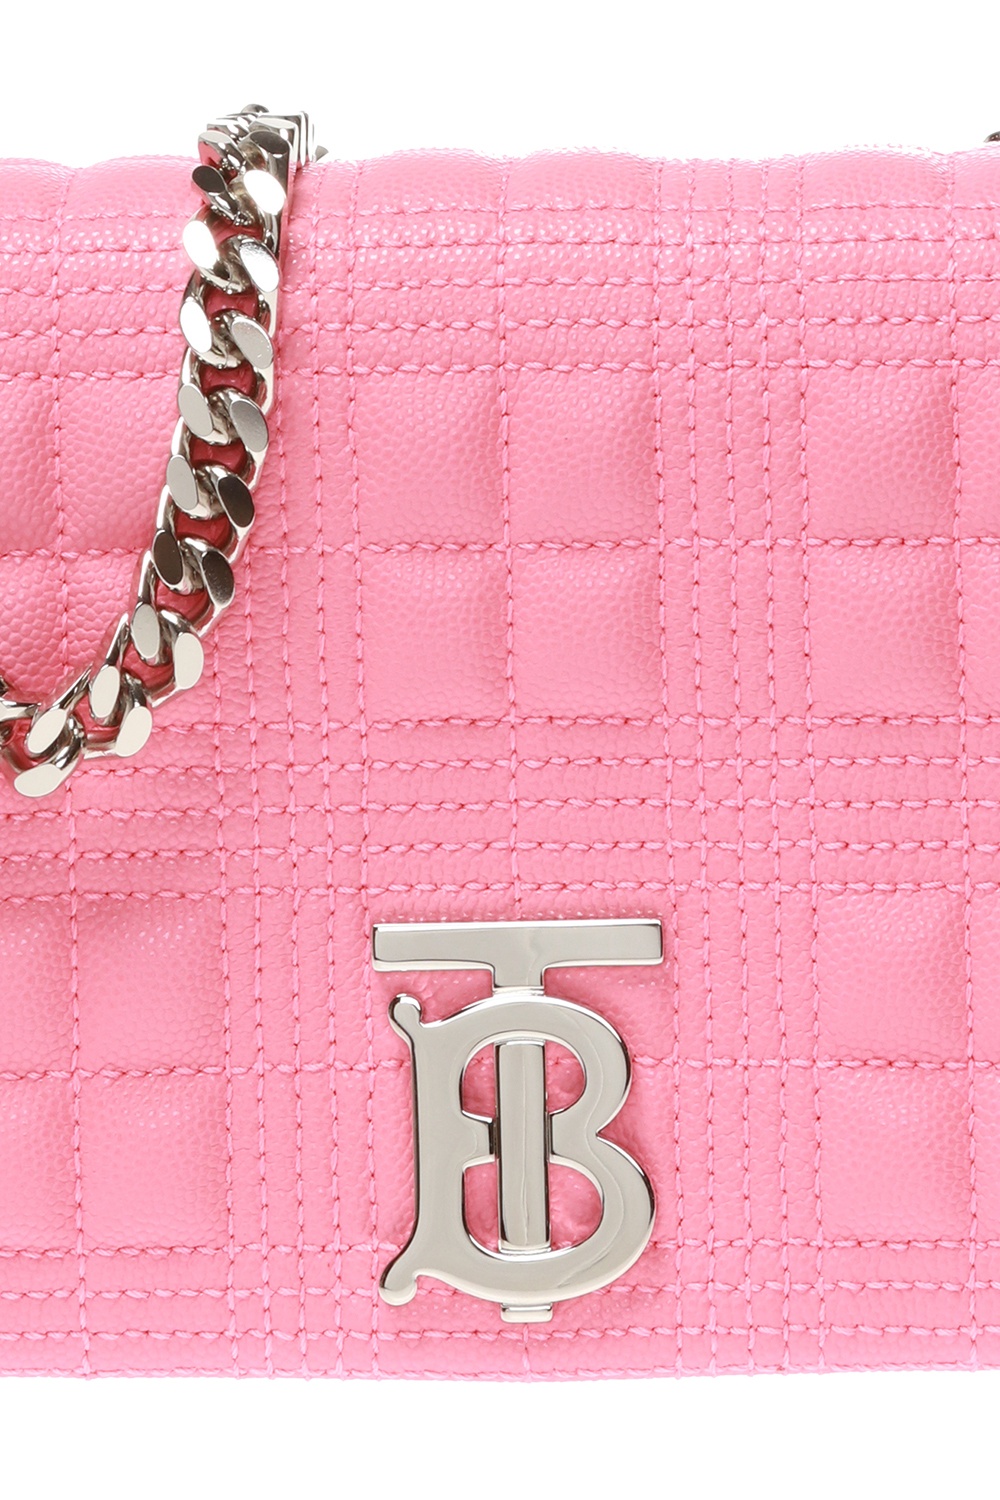 Lola Small Leather Shoulder Bag in Pink - Burberry